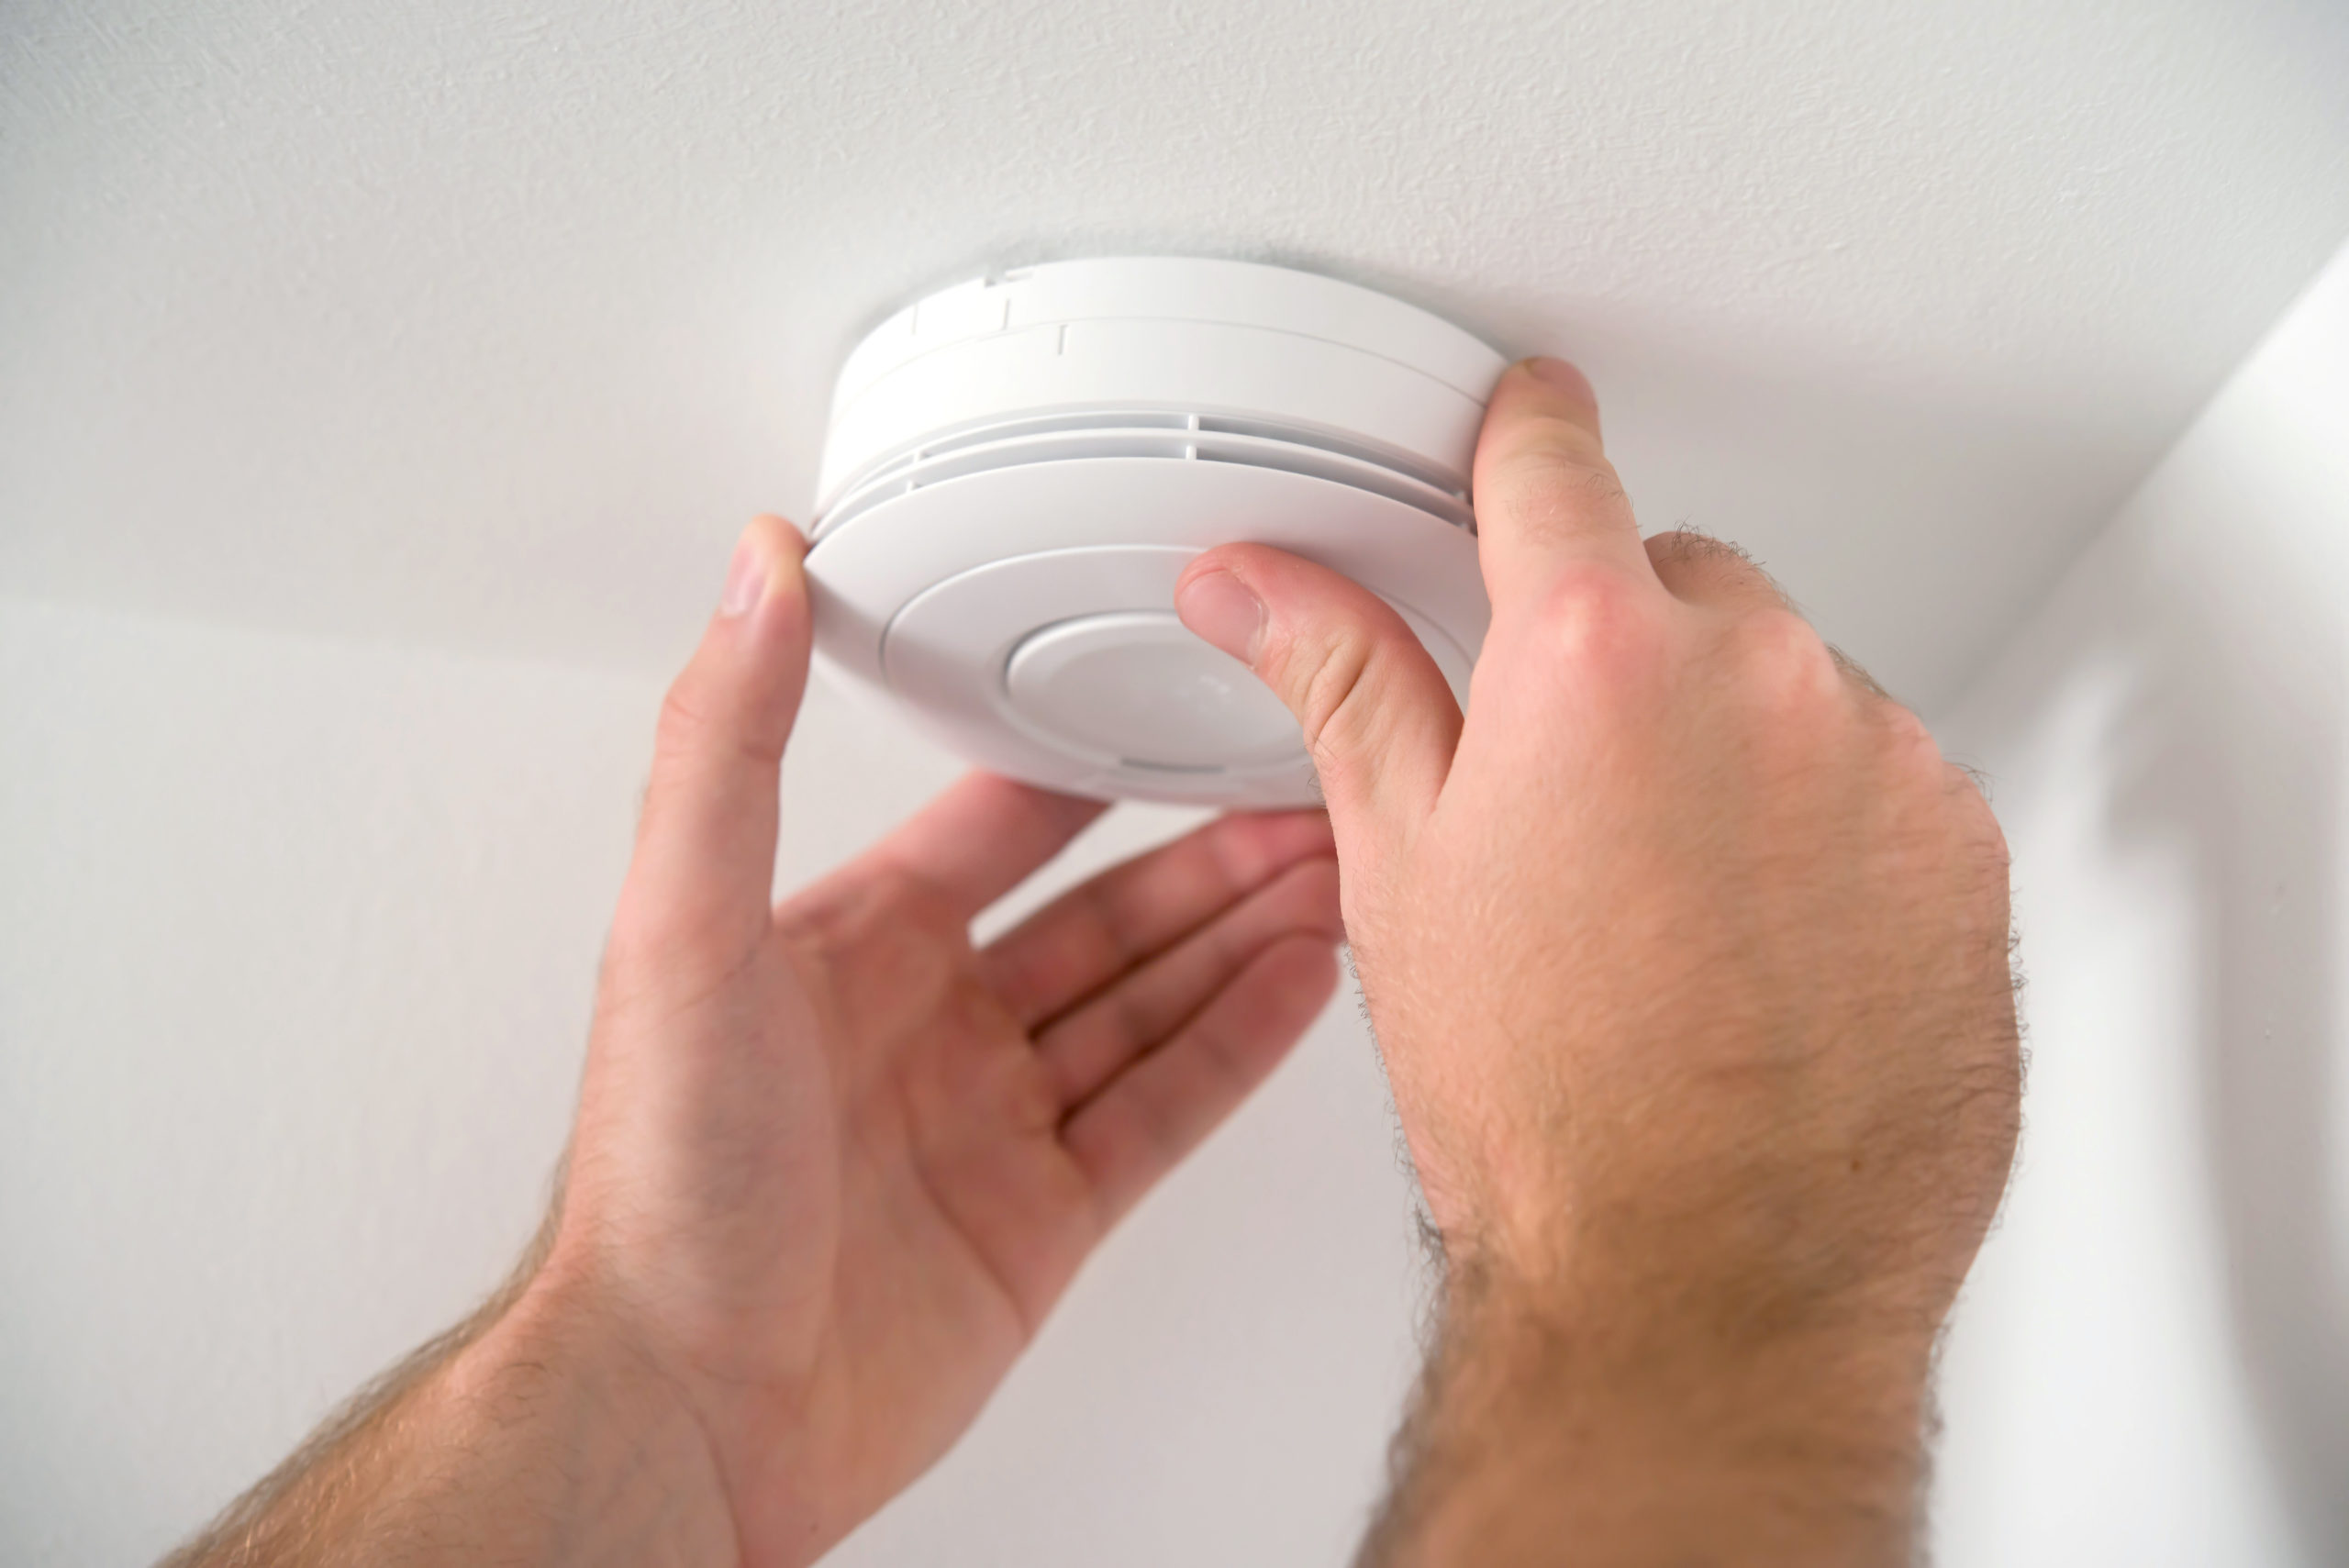 What To Do If A Carbon Monoxide Detector Goes Off